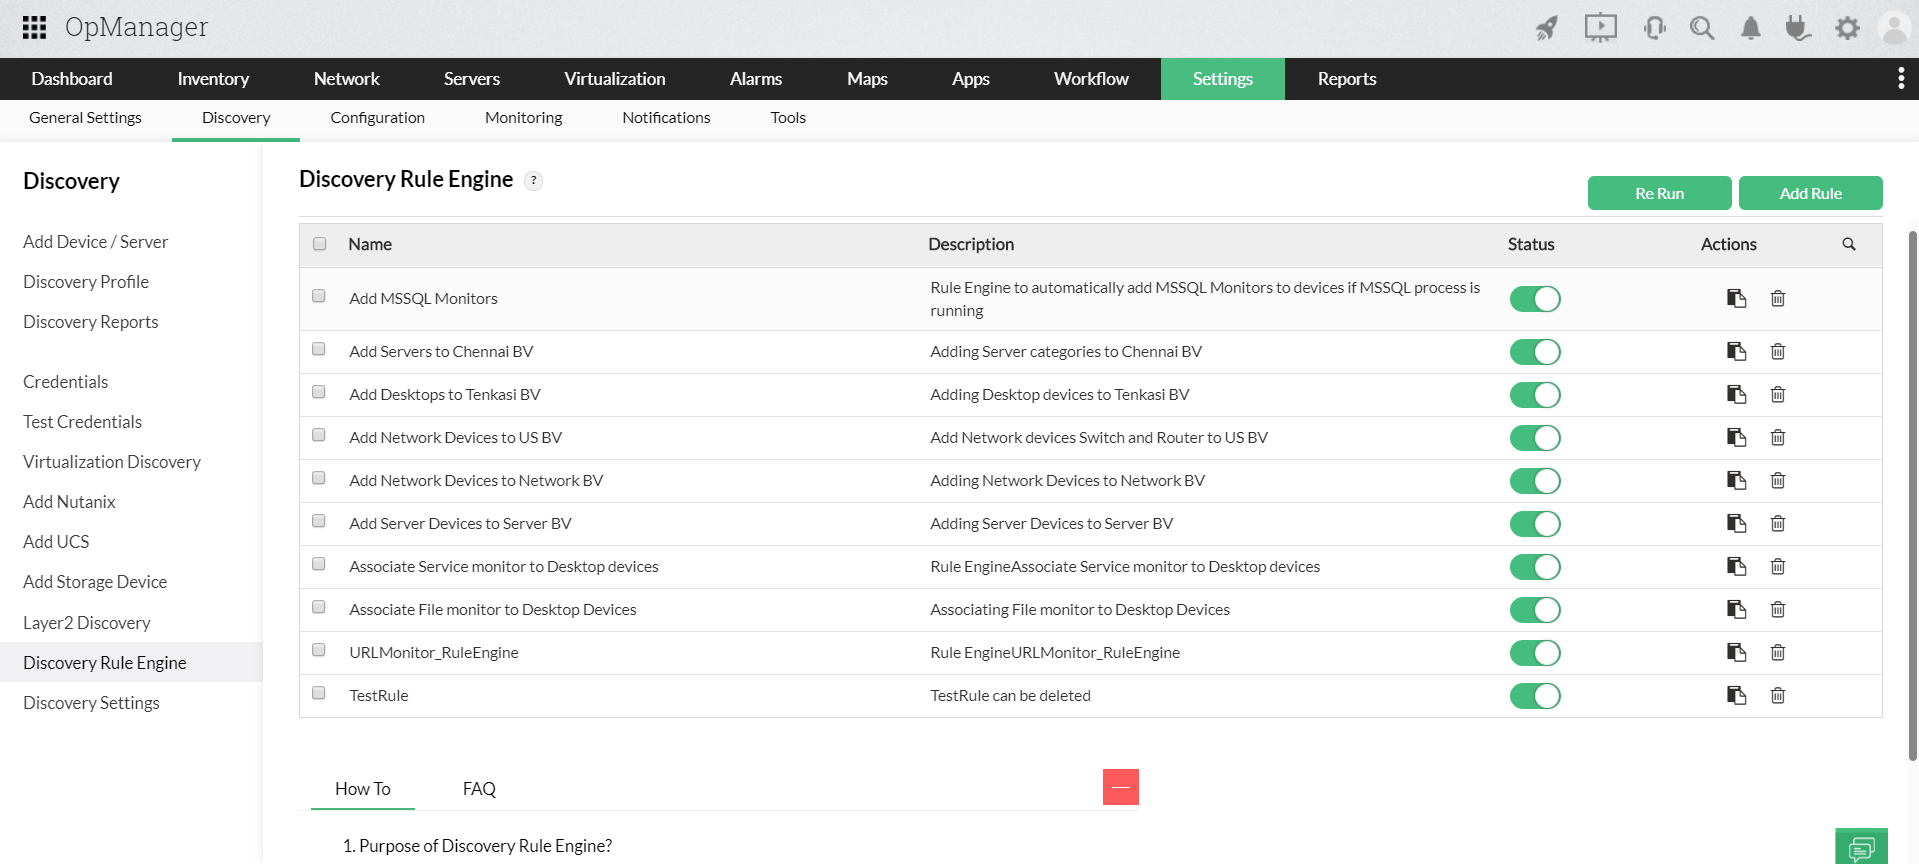 Agentless Network Monitoring Tools - ManageEngine OpManager